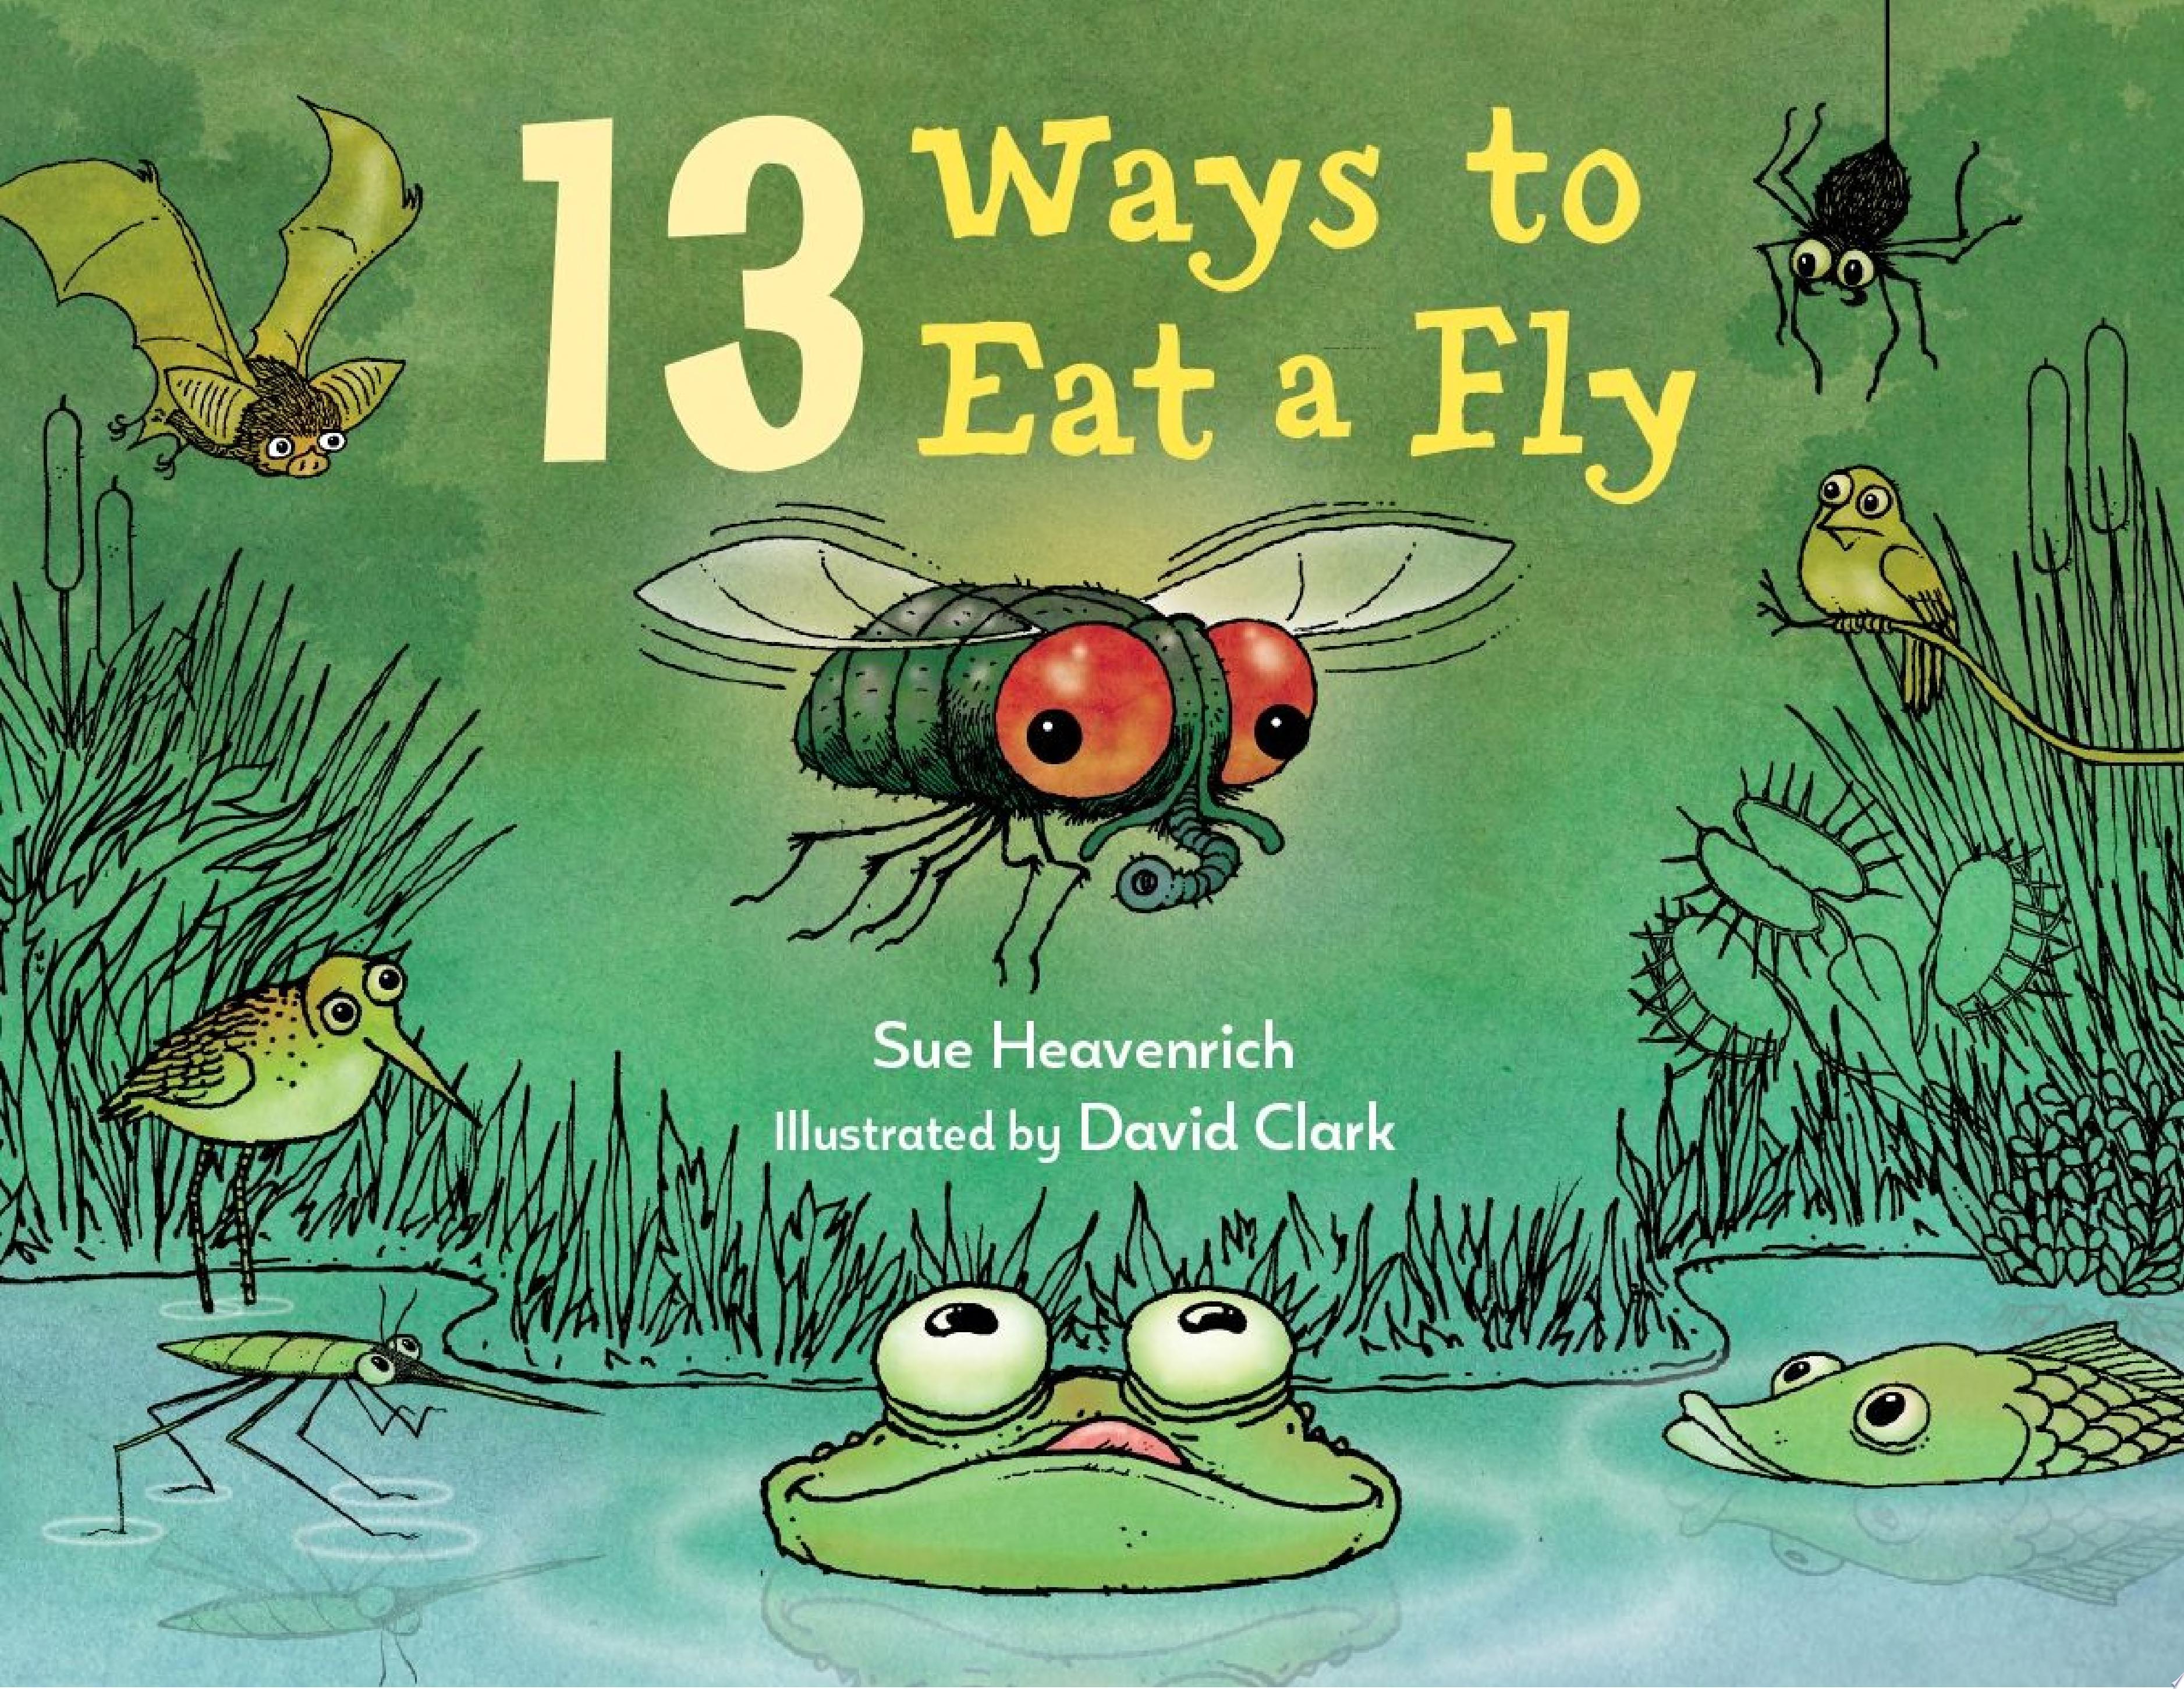 Image for "13 Ways to Eat a Fly"